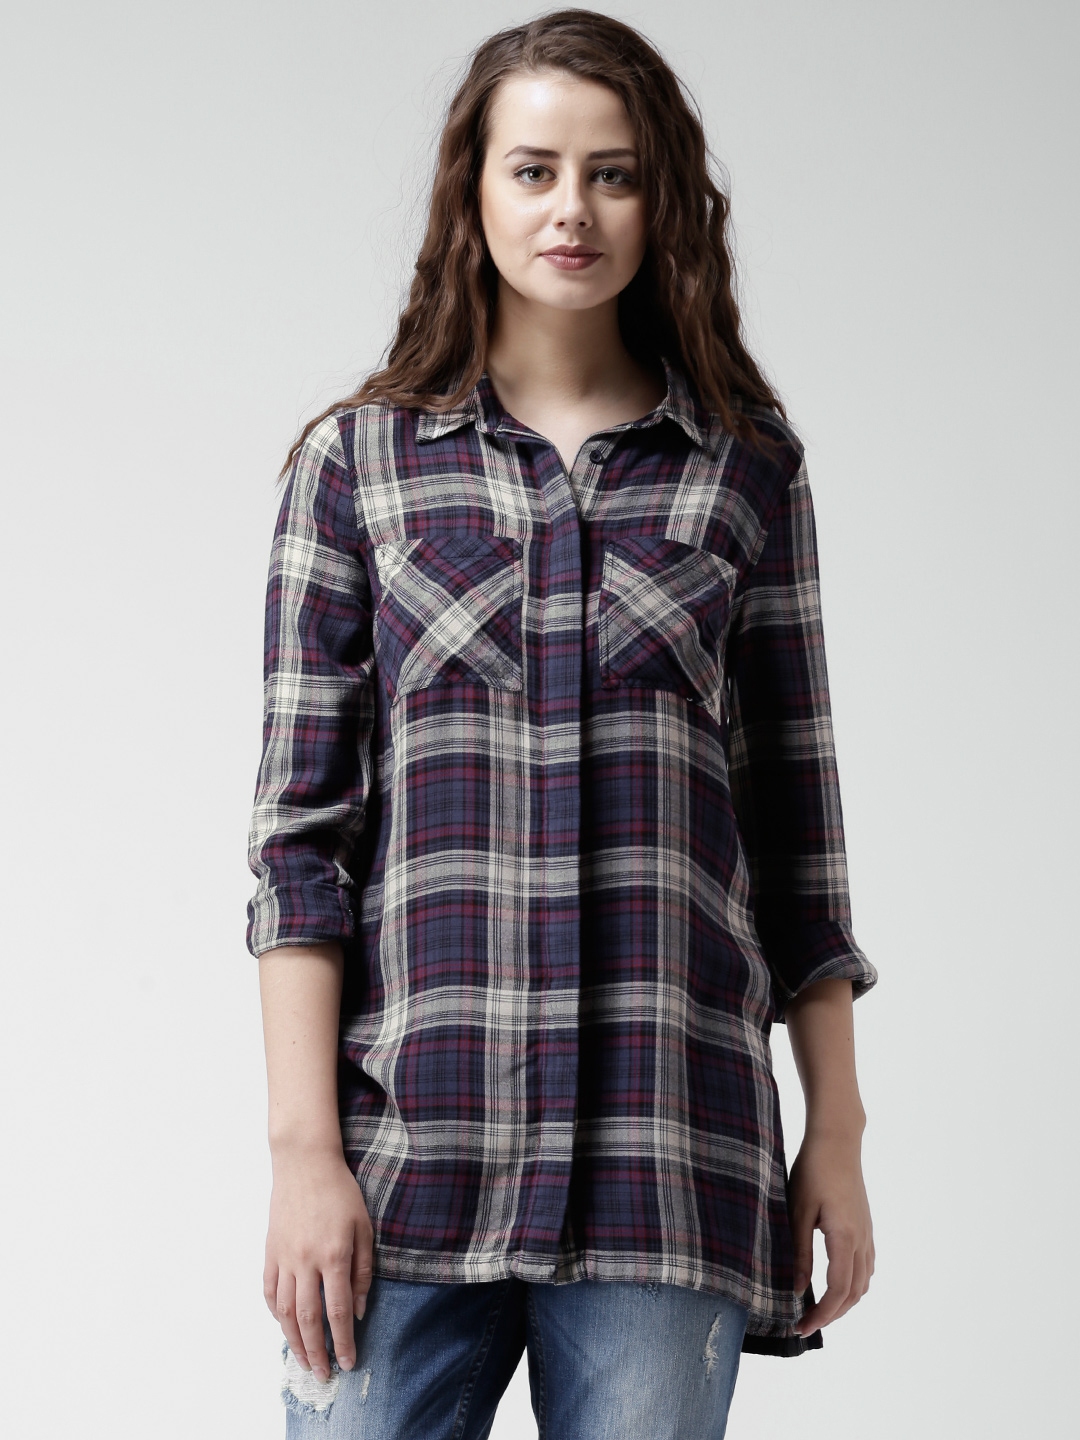 Buy New Look Navy & Beige Checked Shirt - Shirts for Women 1302123 | Myntra